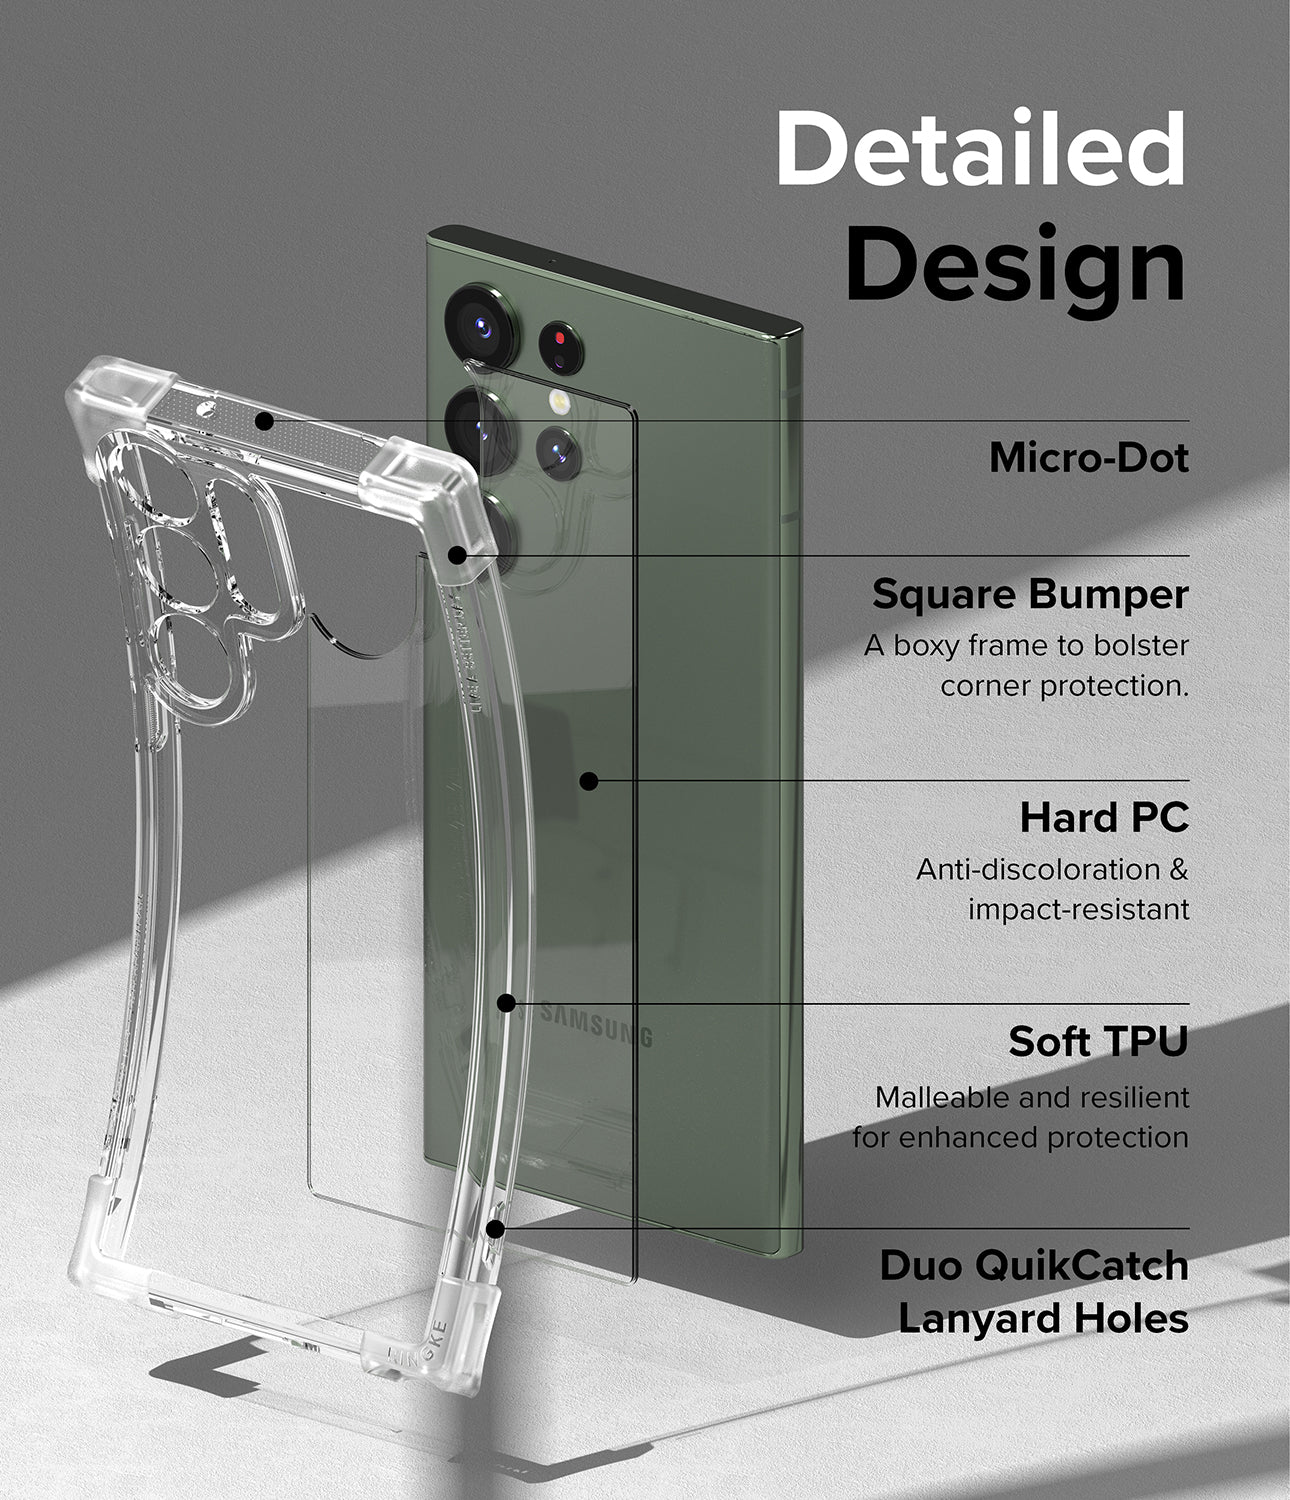 Galaxy S23 Ultra Case | Fusion Bumper - Clear - Detailed Design. Micro-Dot. A boxy frame to bolster corner protection with Square Bumper. Anti-discoloration and impact-resistant with Hard PC. Malleable and resilient for enhanced protection with soft TPU. Duo QuikCatch Lanyard Holes.